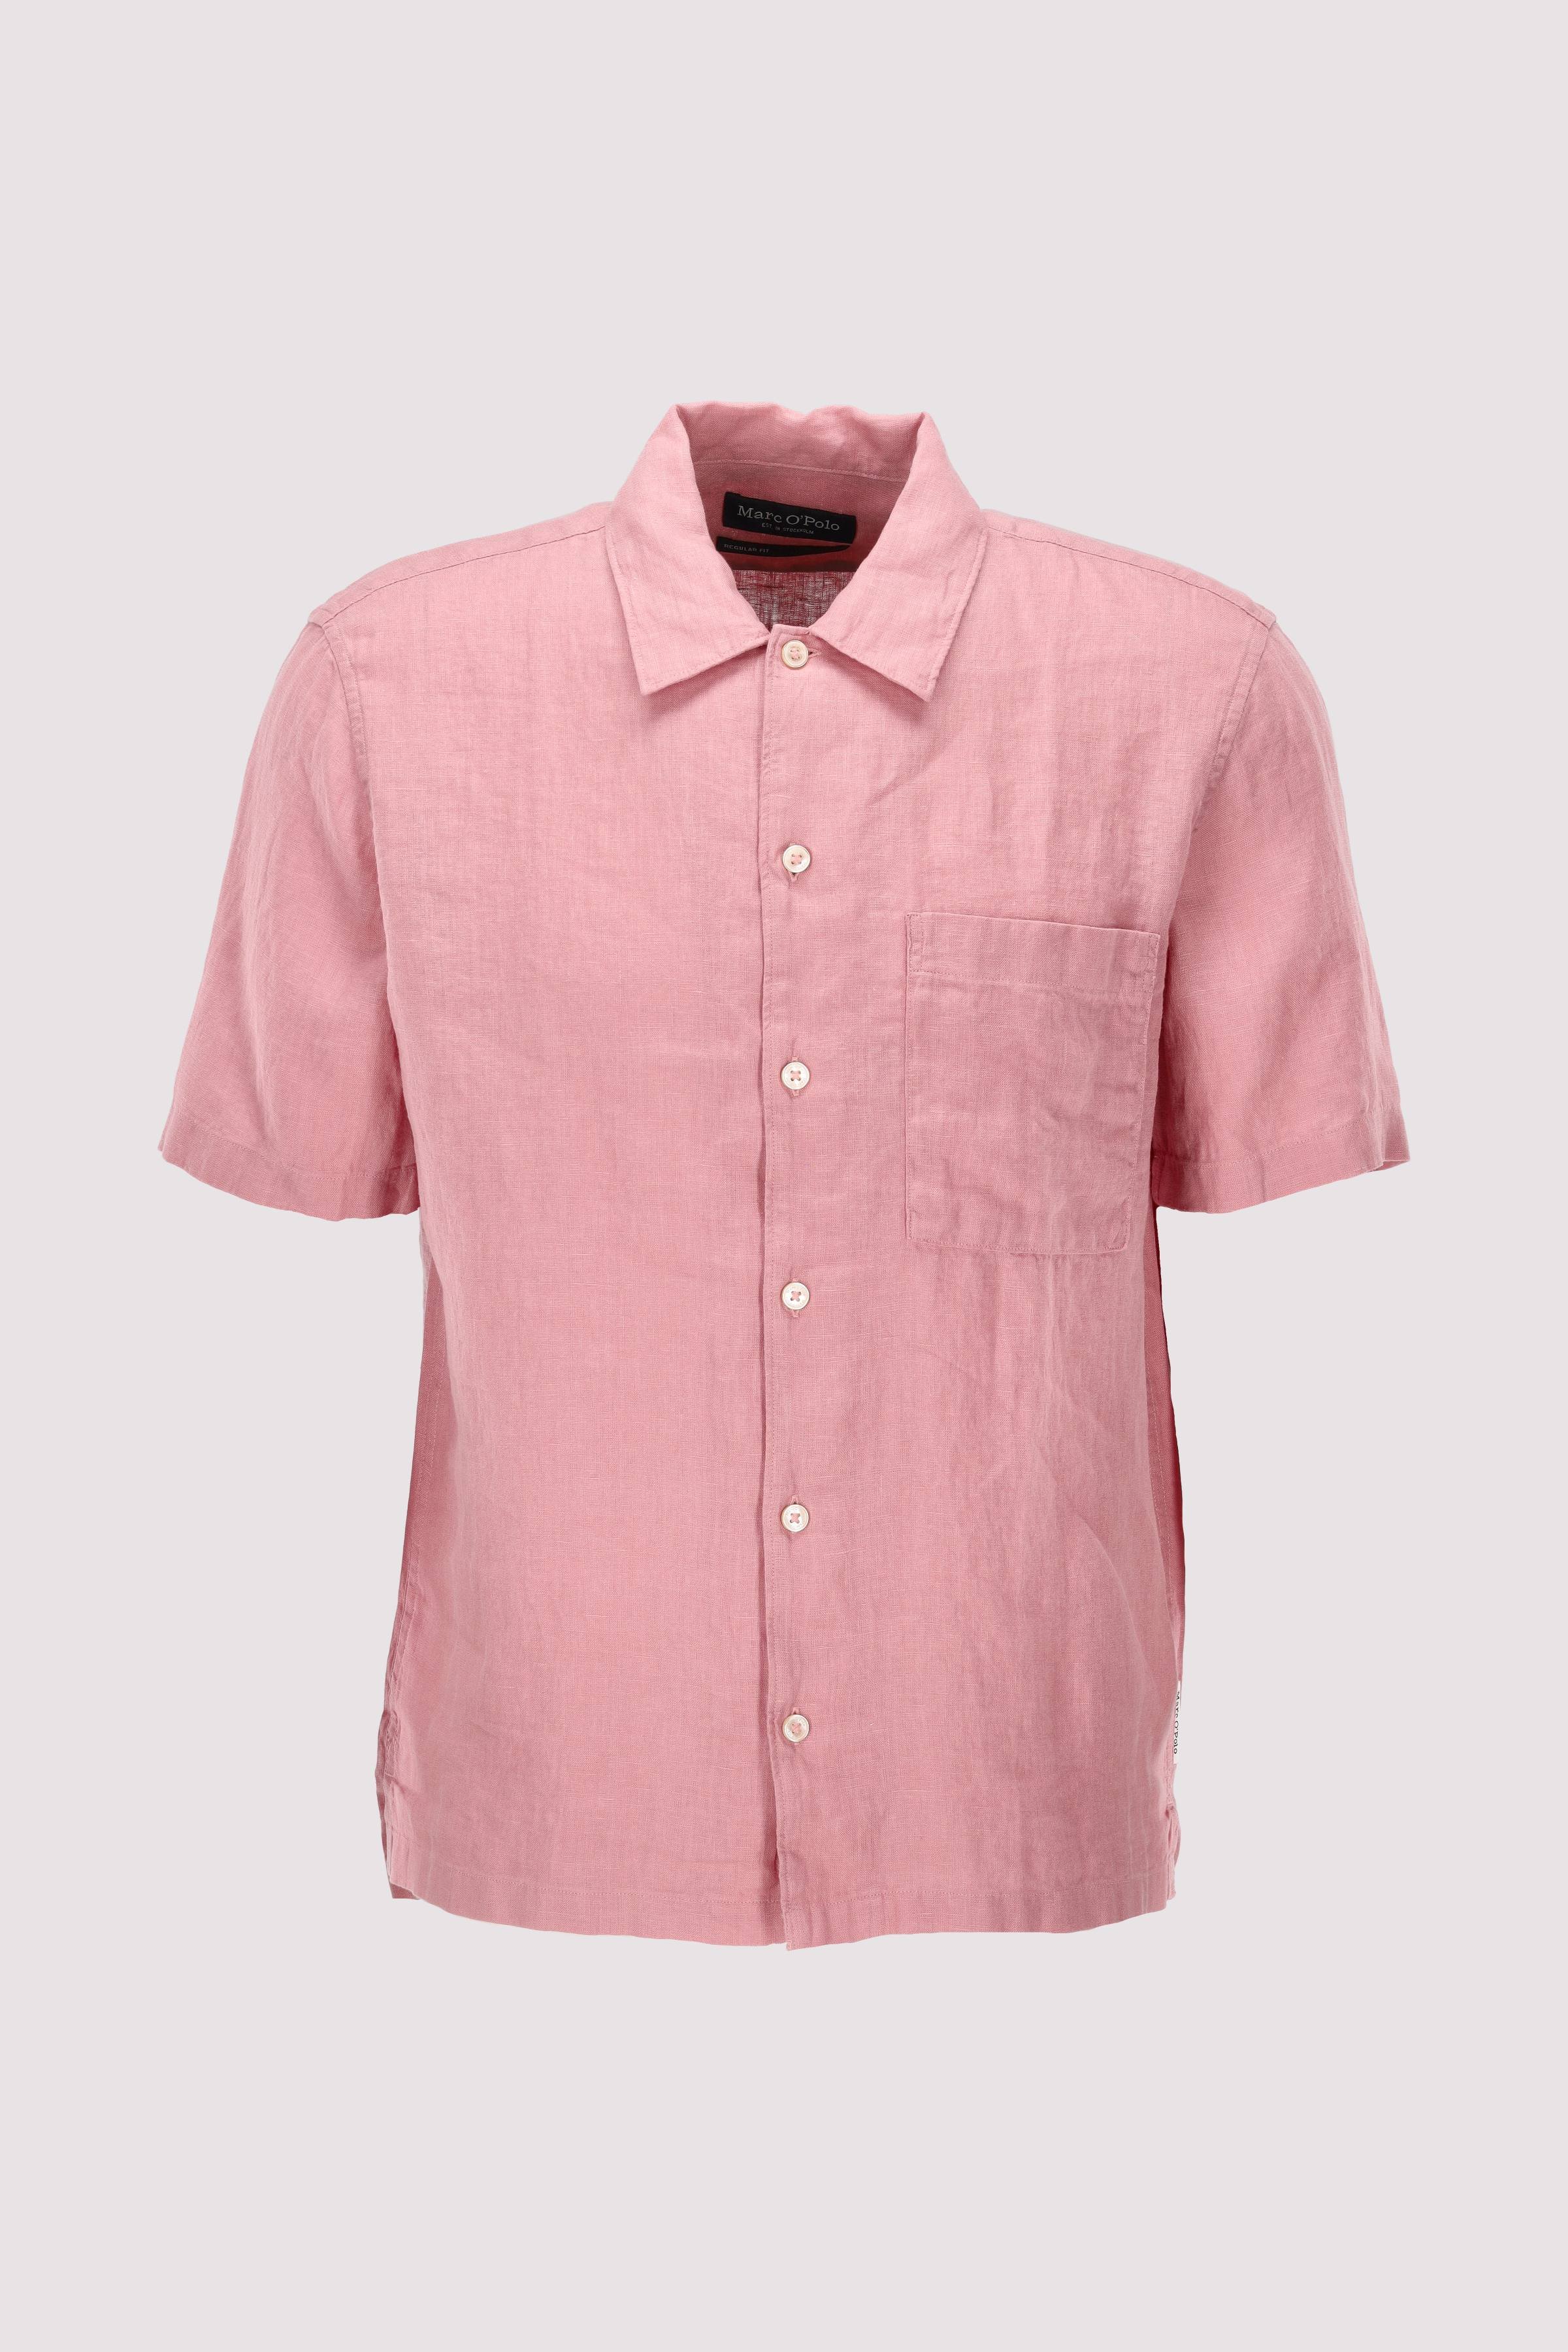 Camp collar,short sleeves,one 